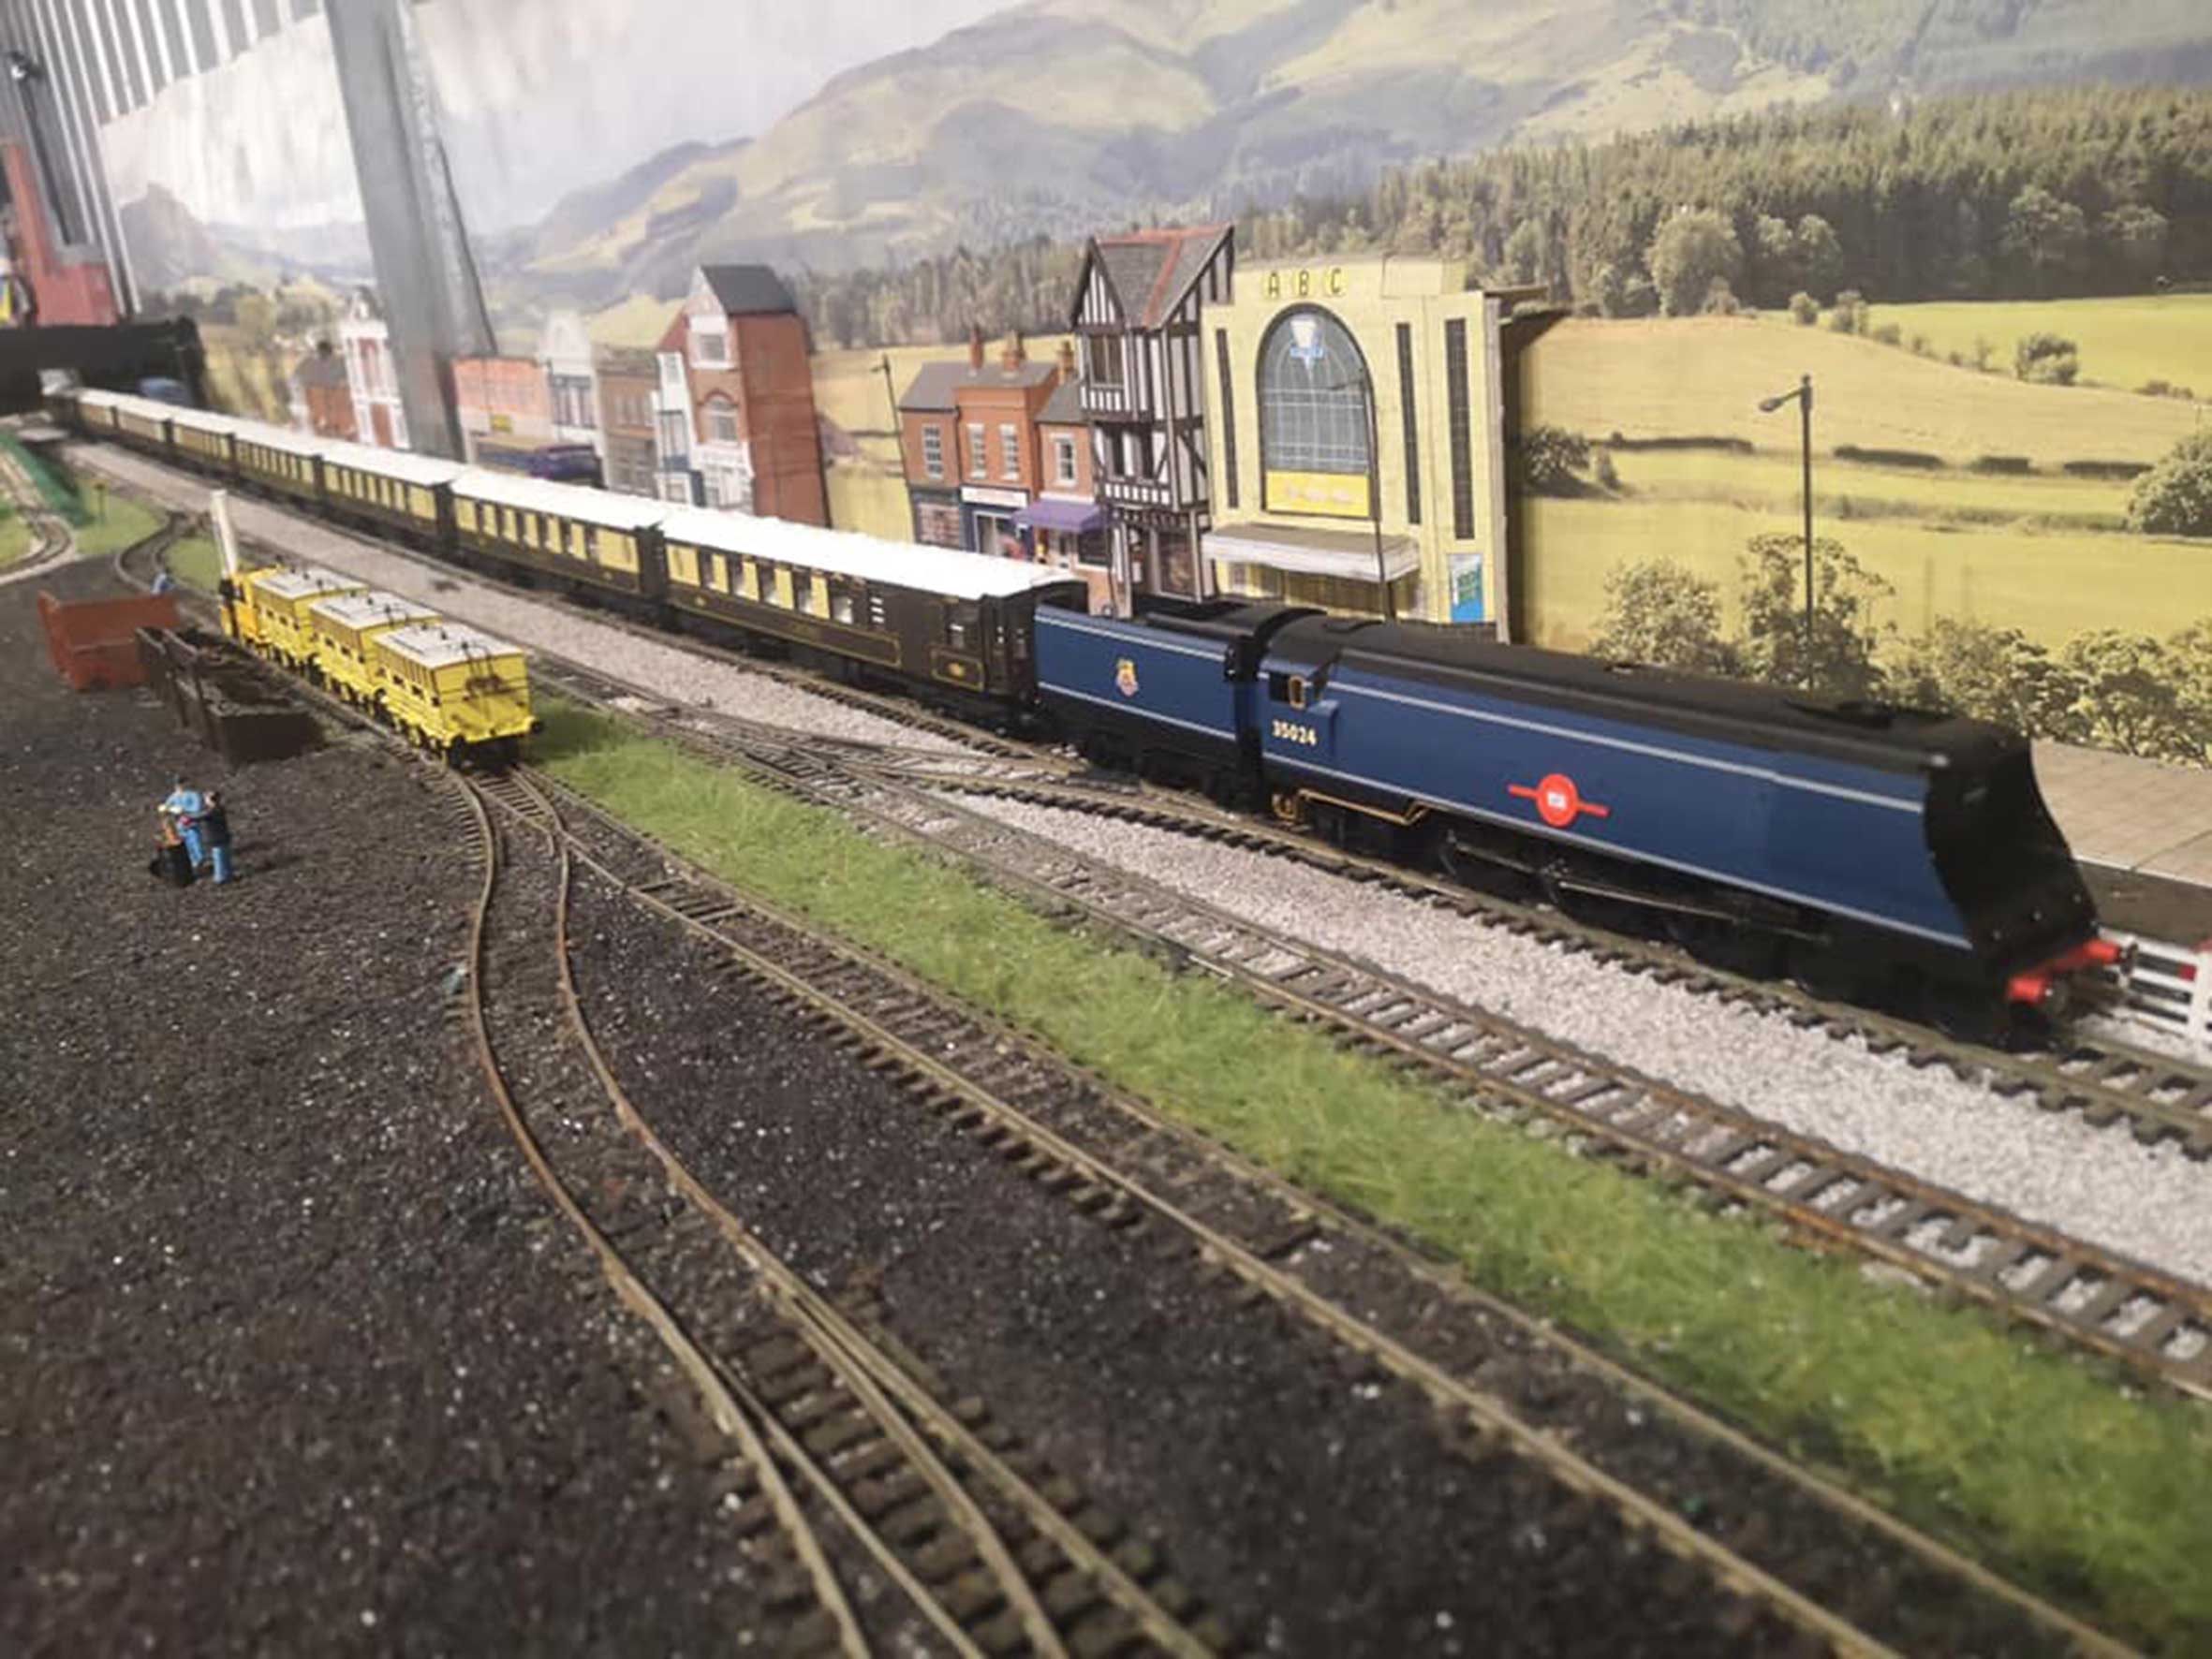 Gower Layout